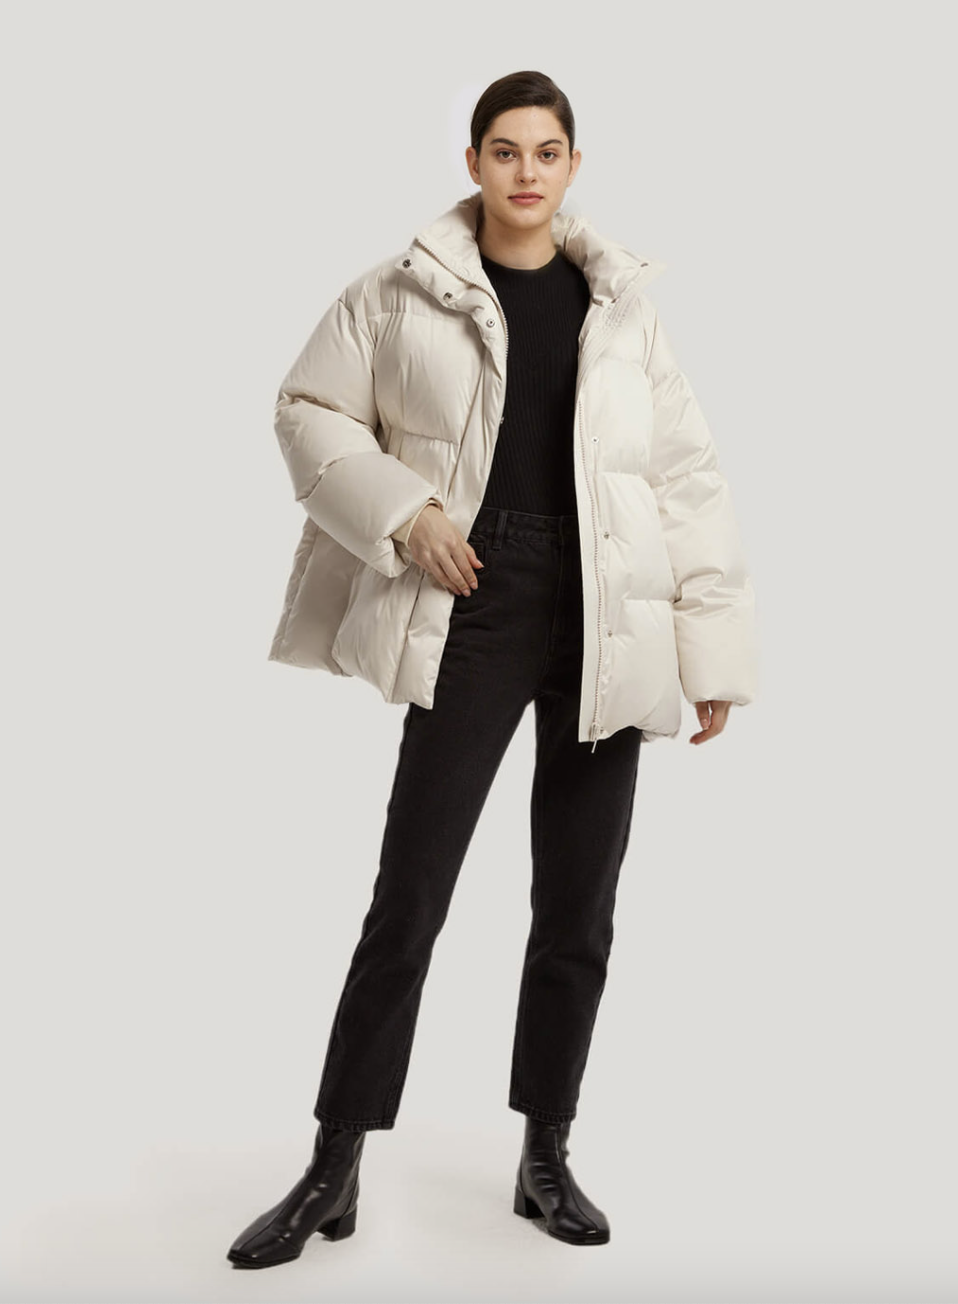 Nap Matte Quilted Puffer Jacket in white with black pants and black leather boots